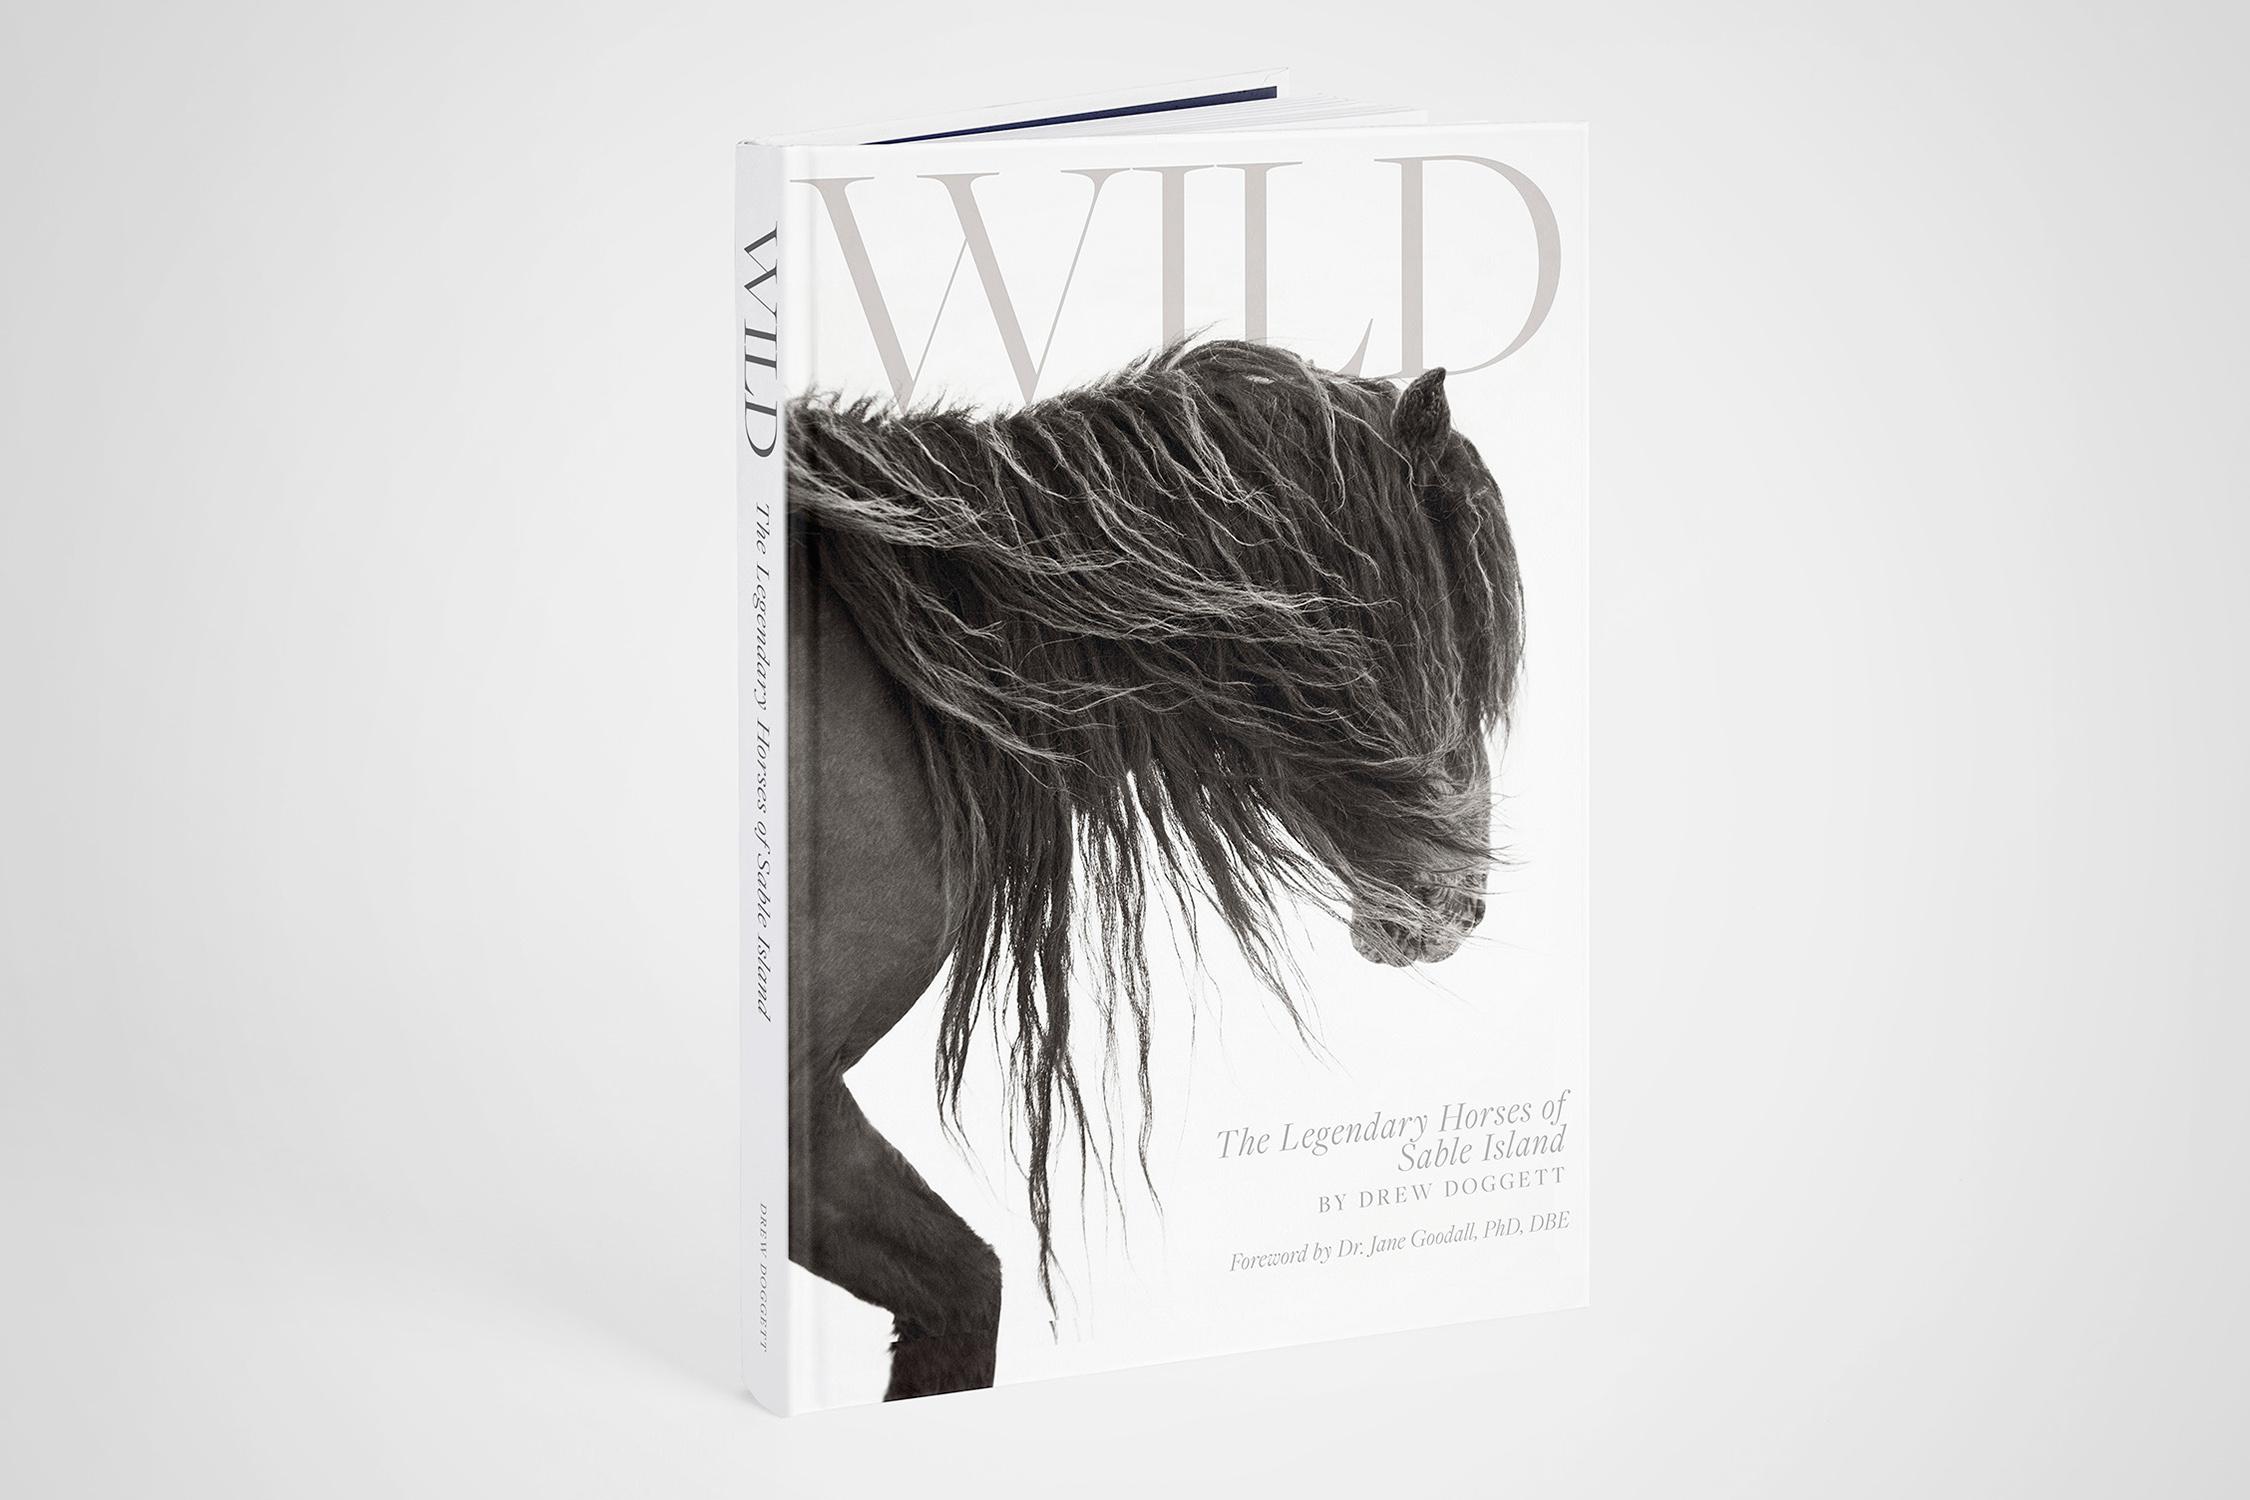 "Wild: The Legendary Horses of Sable Island" Large Format Coffee Table Book - Art by Drew Doggett